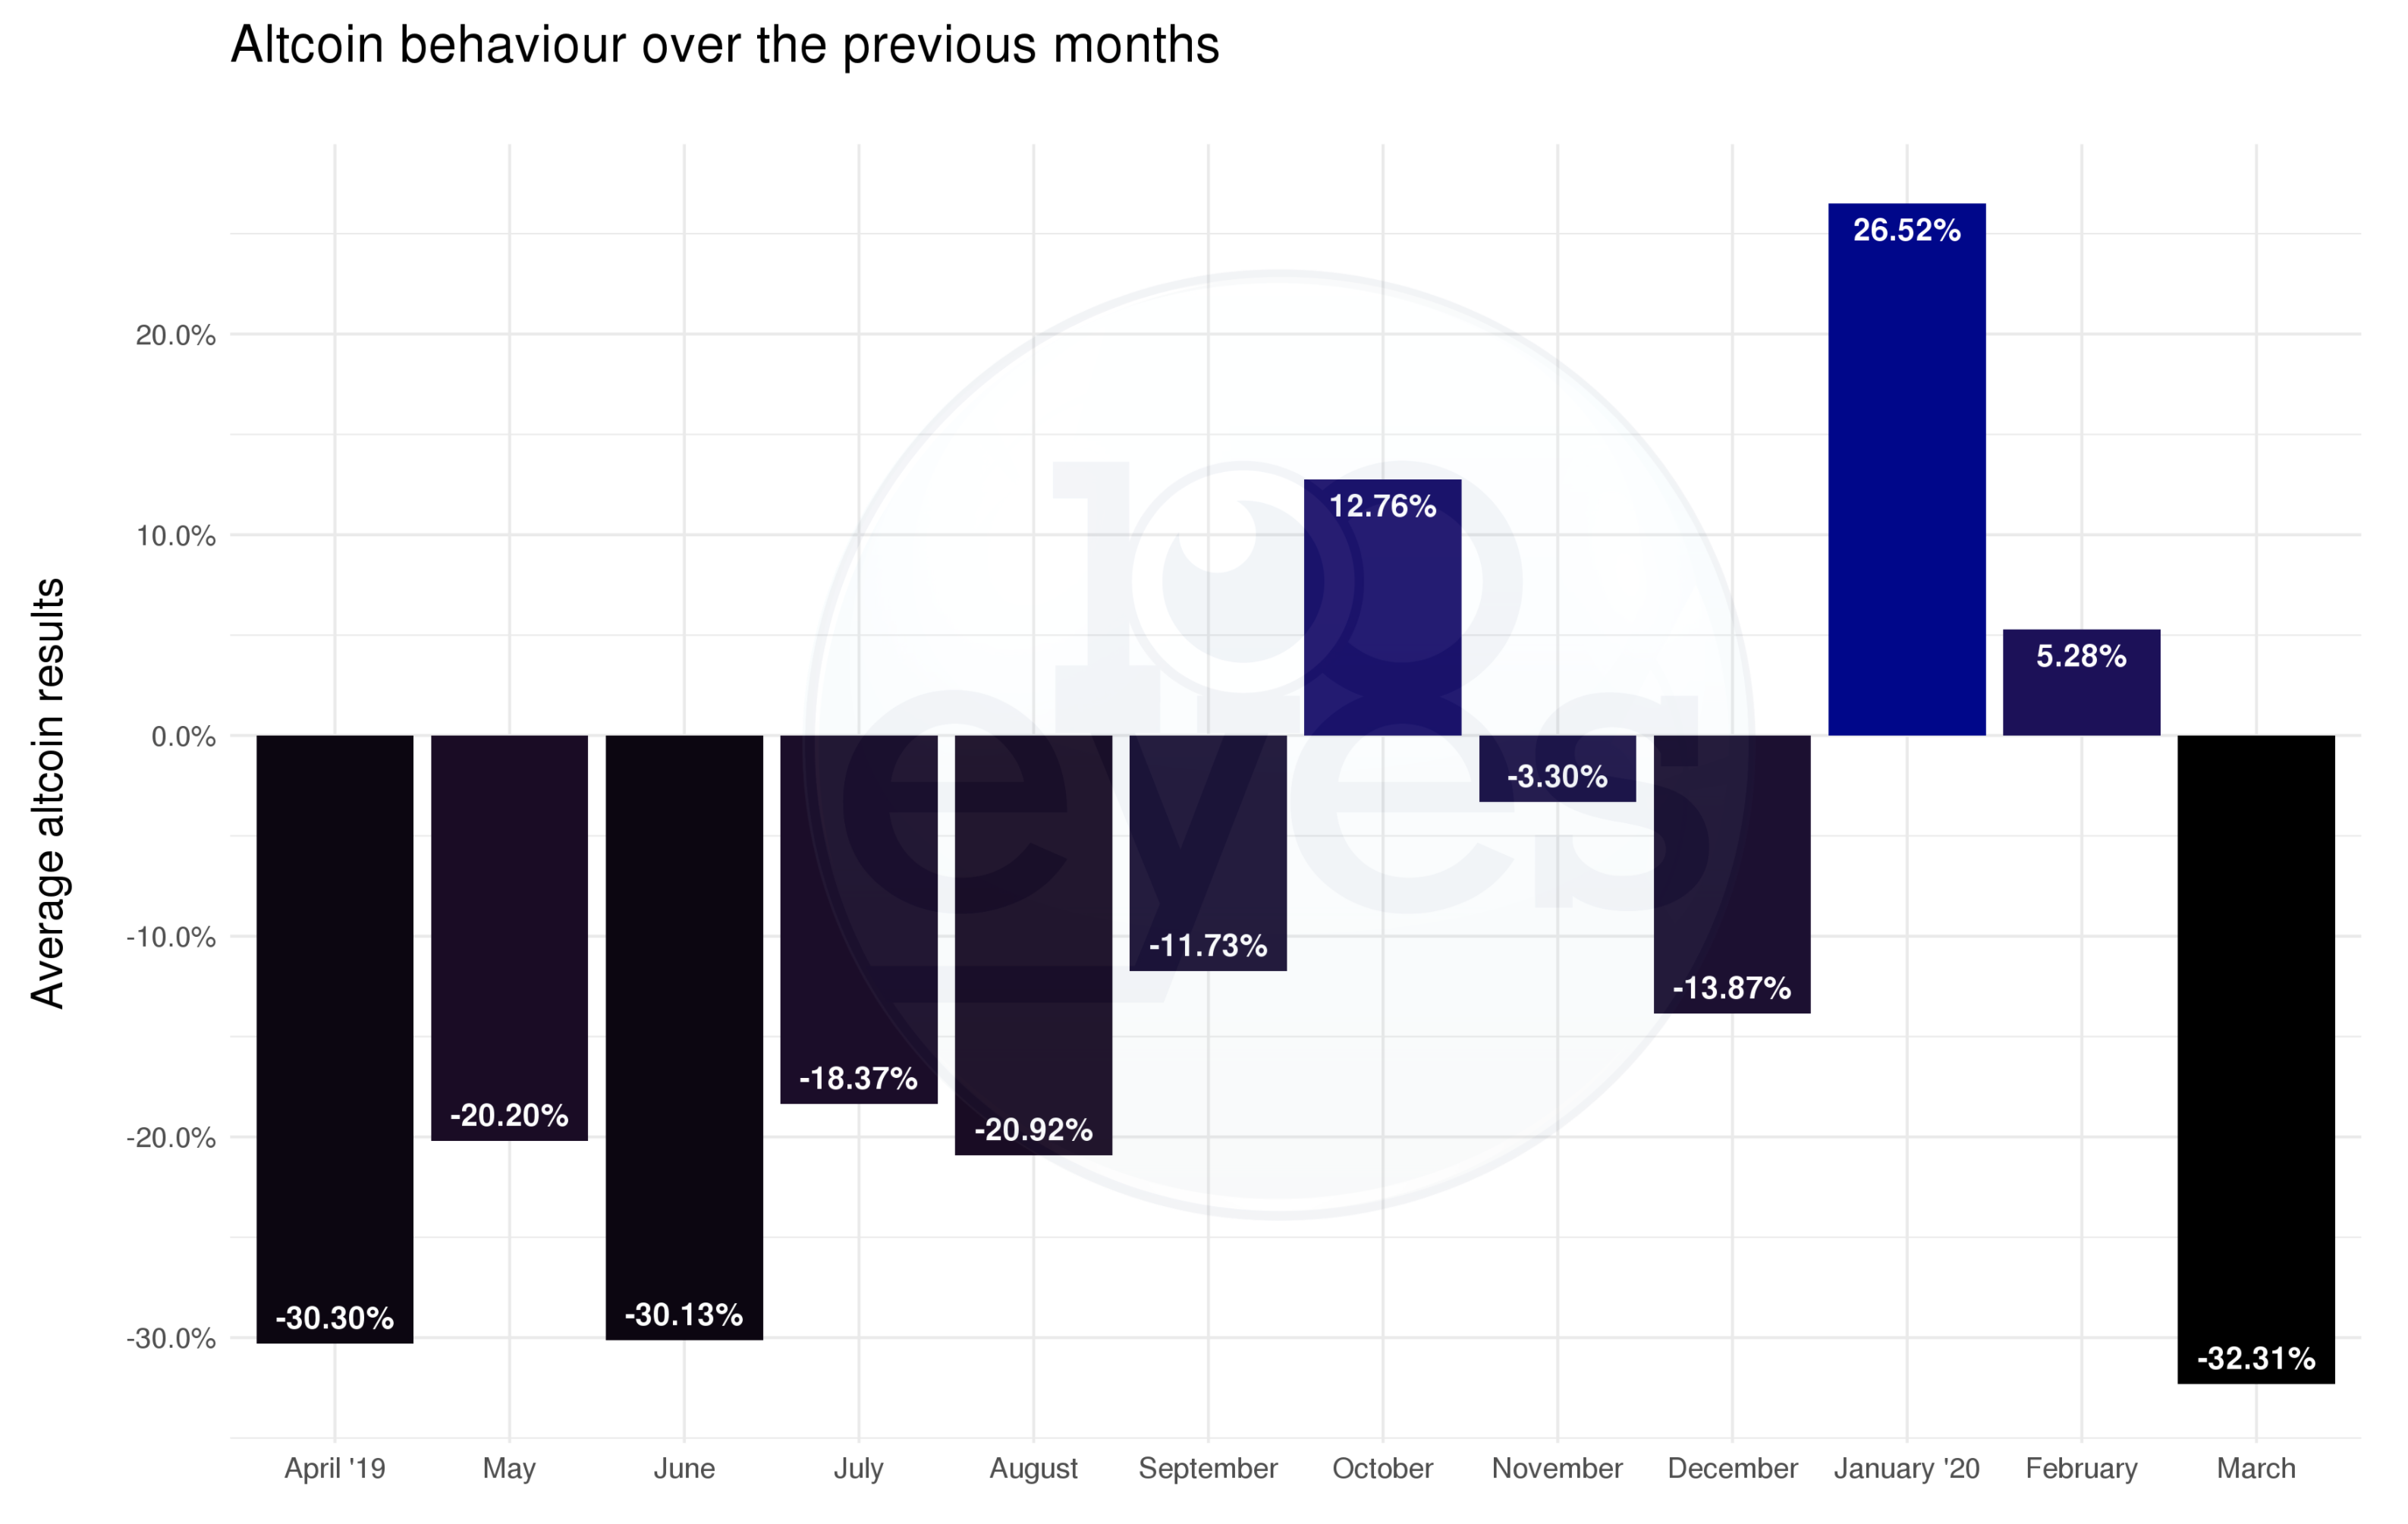 Showing the overall performance of the crypto and altcoin market over the past twelve months